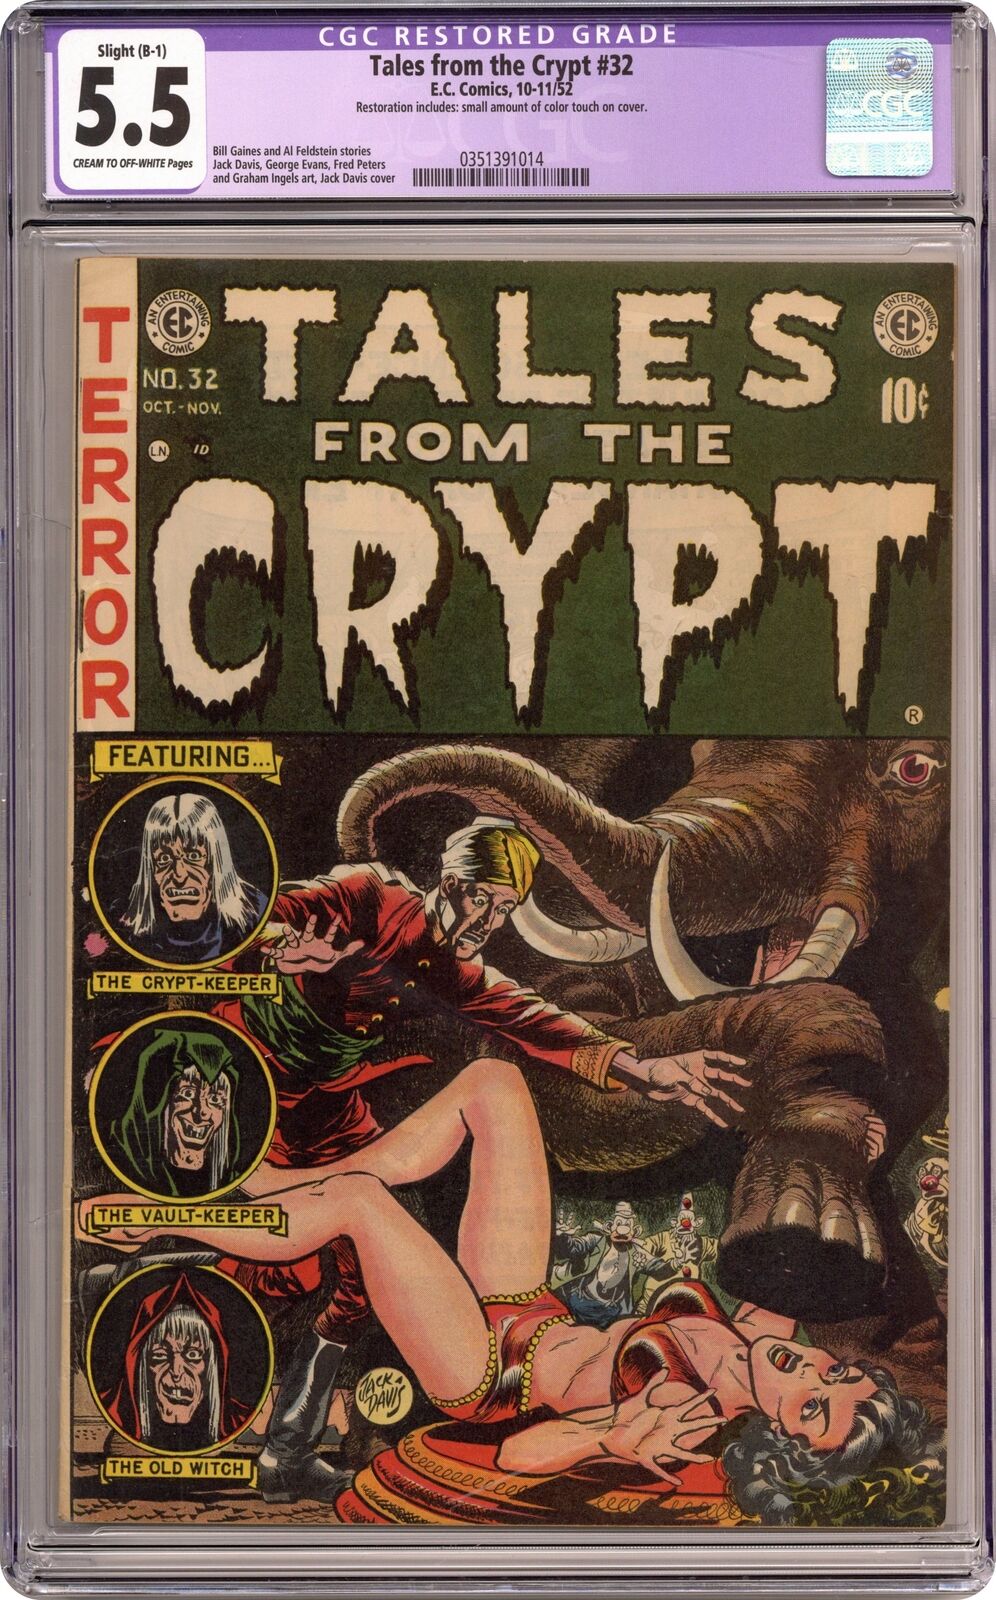 Tales from the Crypt #32 CGC 5.5 RESTORED 1952 0351391014